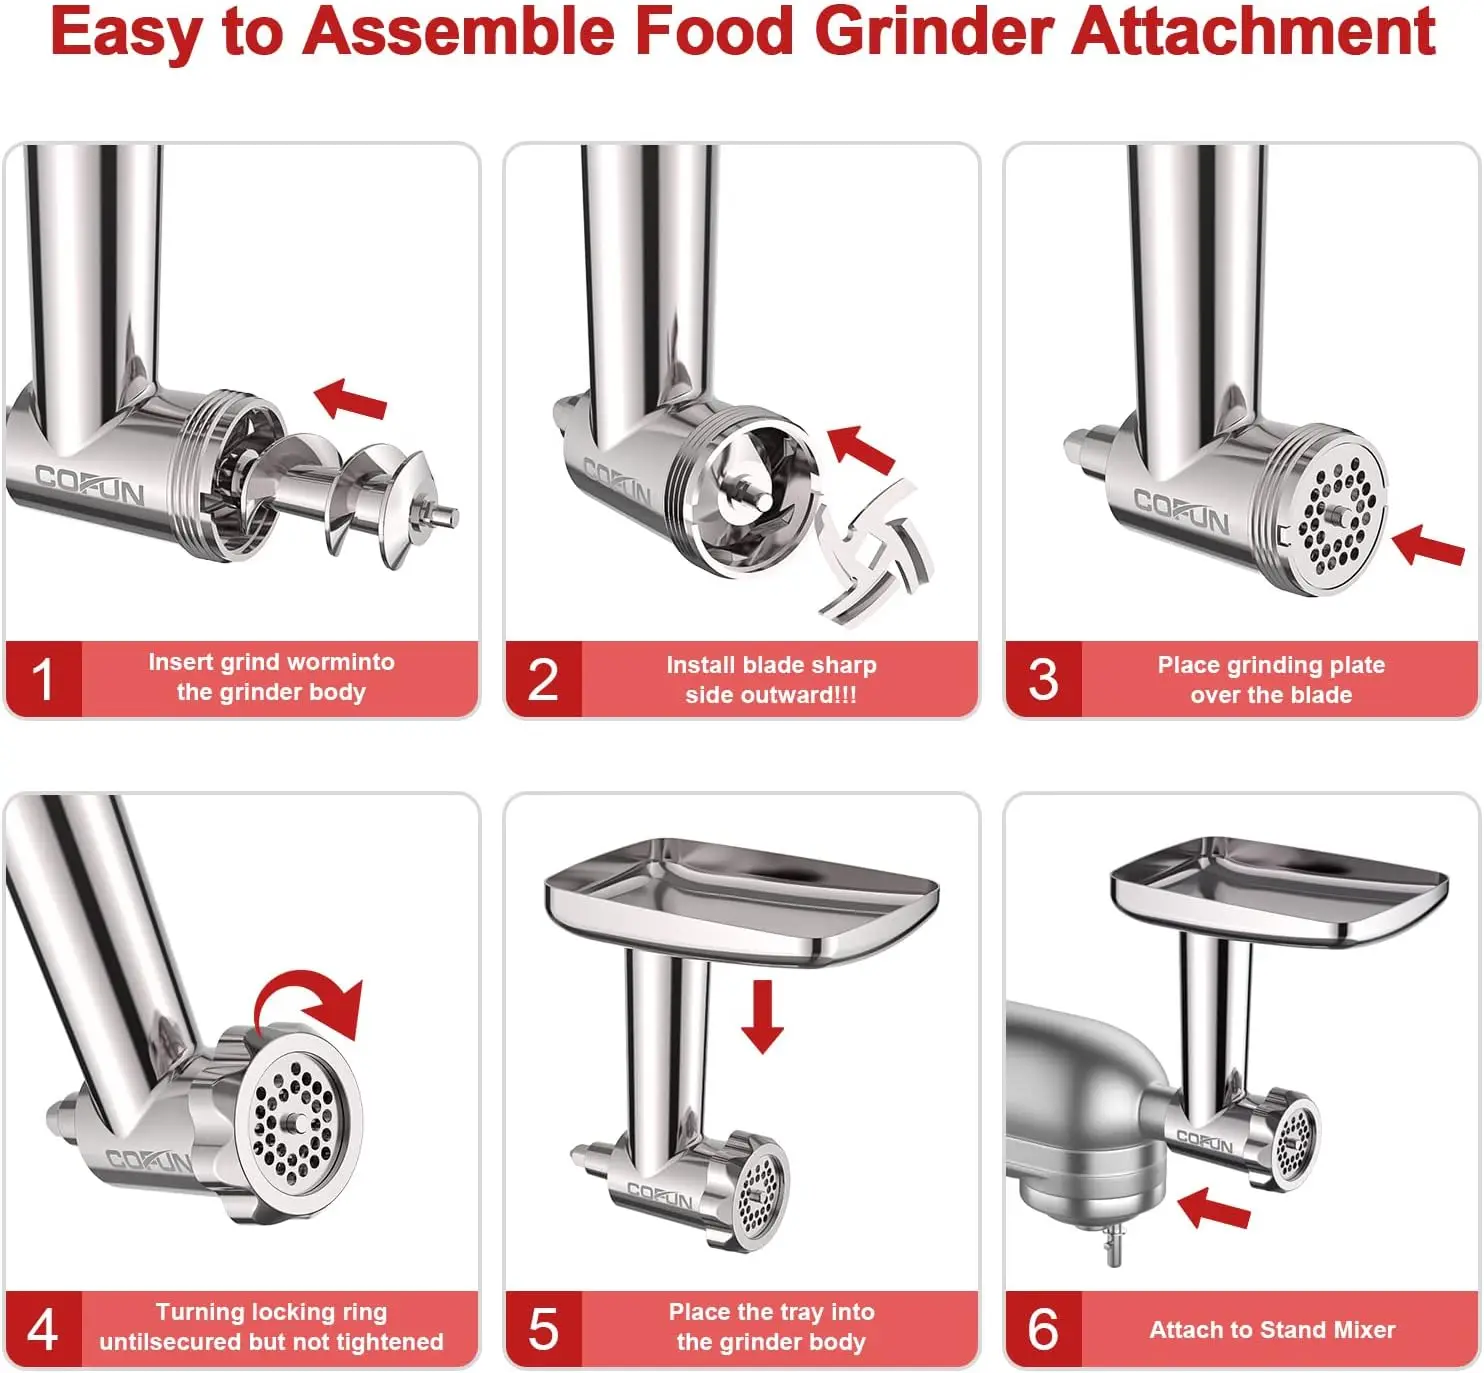 https://ae01.alicdn.com/kf/Sa70af9c0e4474f38a77cf839994ffa5cm/Meat-Grinder-Attachment-for-Kitchenaid-Stand-Mixer-Stainless-Steel-Kitchenaid-Meat-Grinder-Attachment-with-3-Sausage.jpg